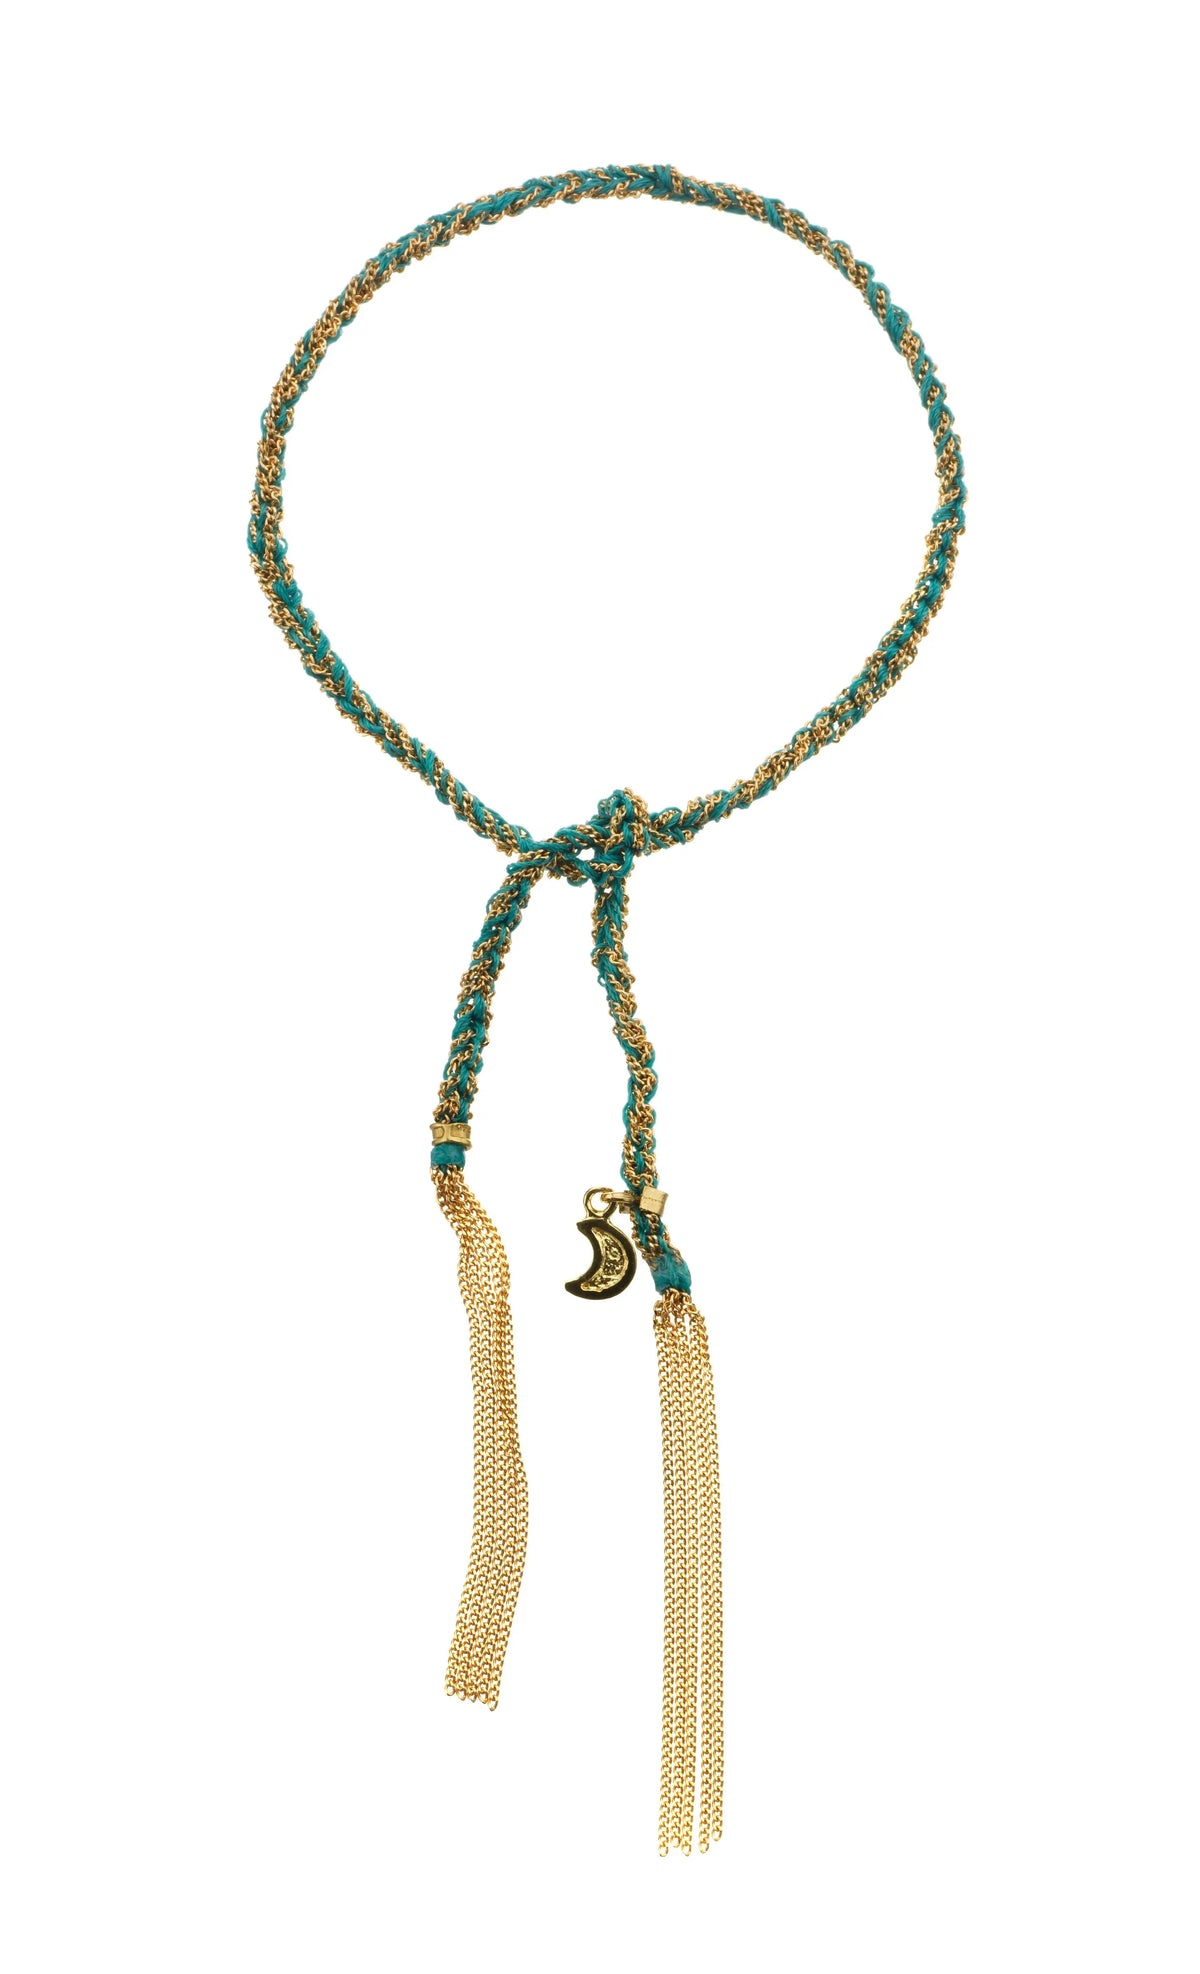 Lucky Bracelet with Moon Charm - Squash Blossom Vail